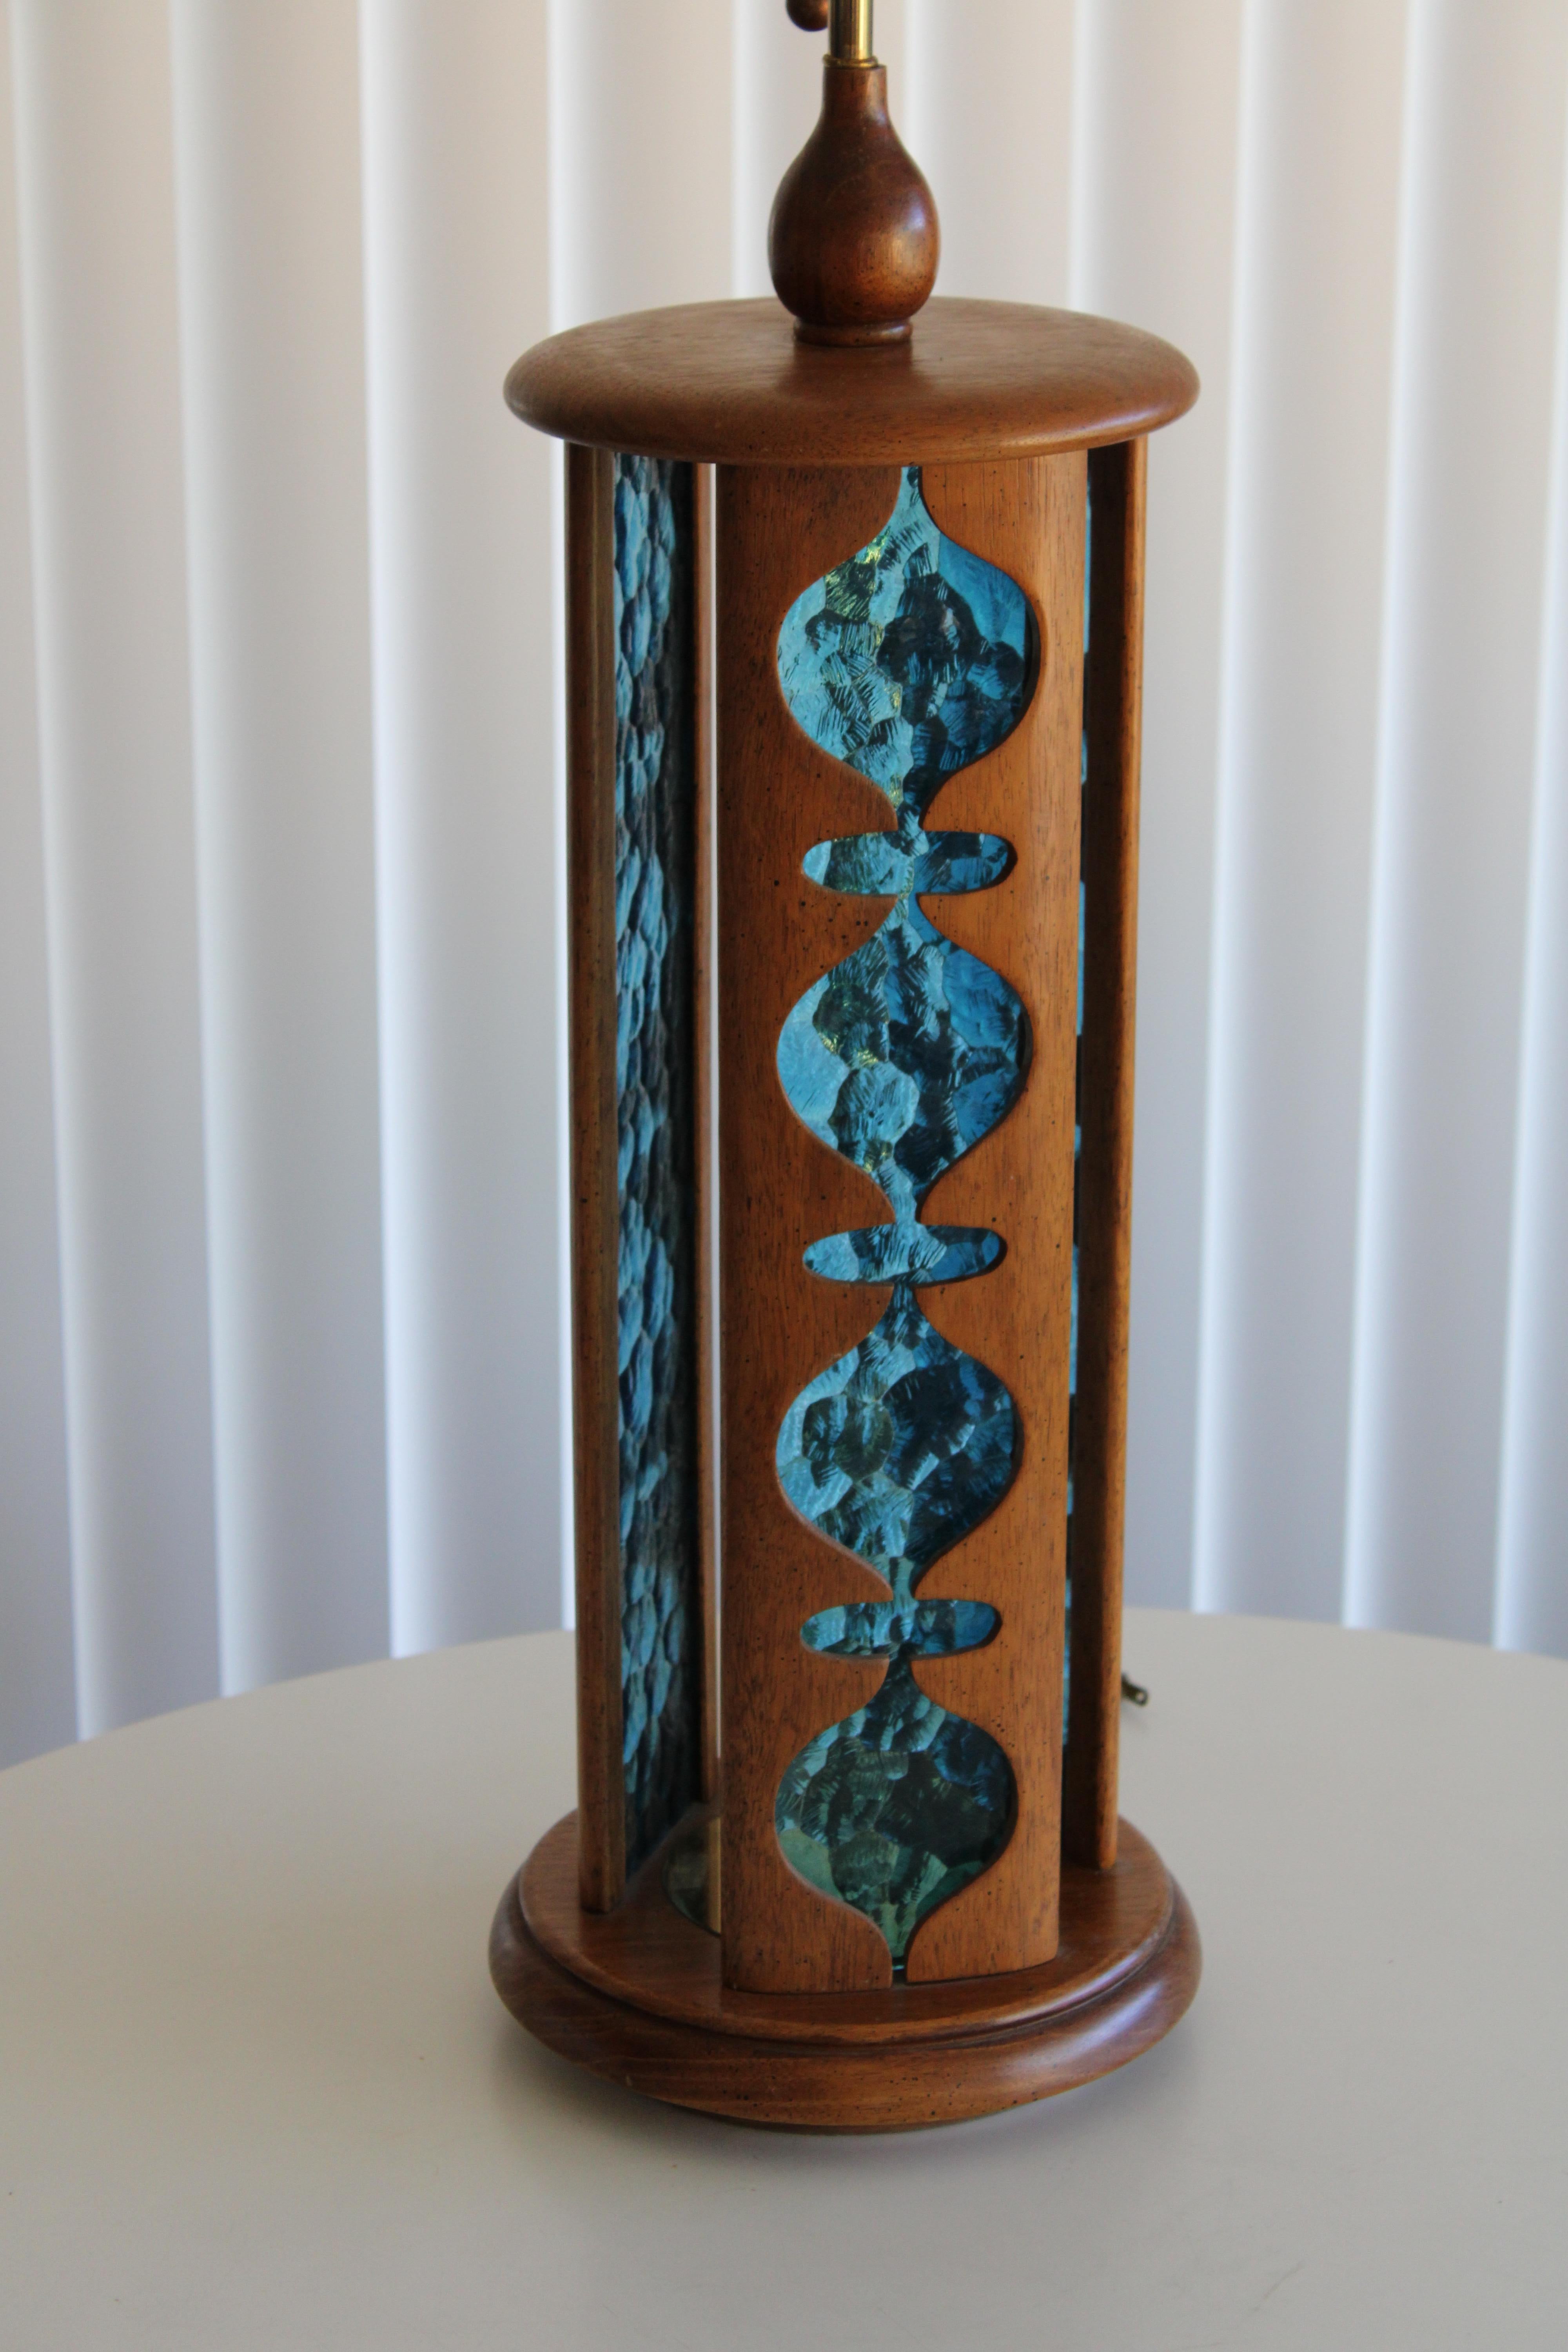 A tall mid century table lamp by Modeline. Three solid walnut panels have modern shaped cut-outs, and behind is bright blue textured lucite. Pull-chain bakelite socket has original Modeline label. Lamp measures 41